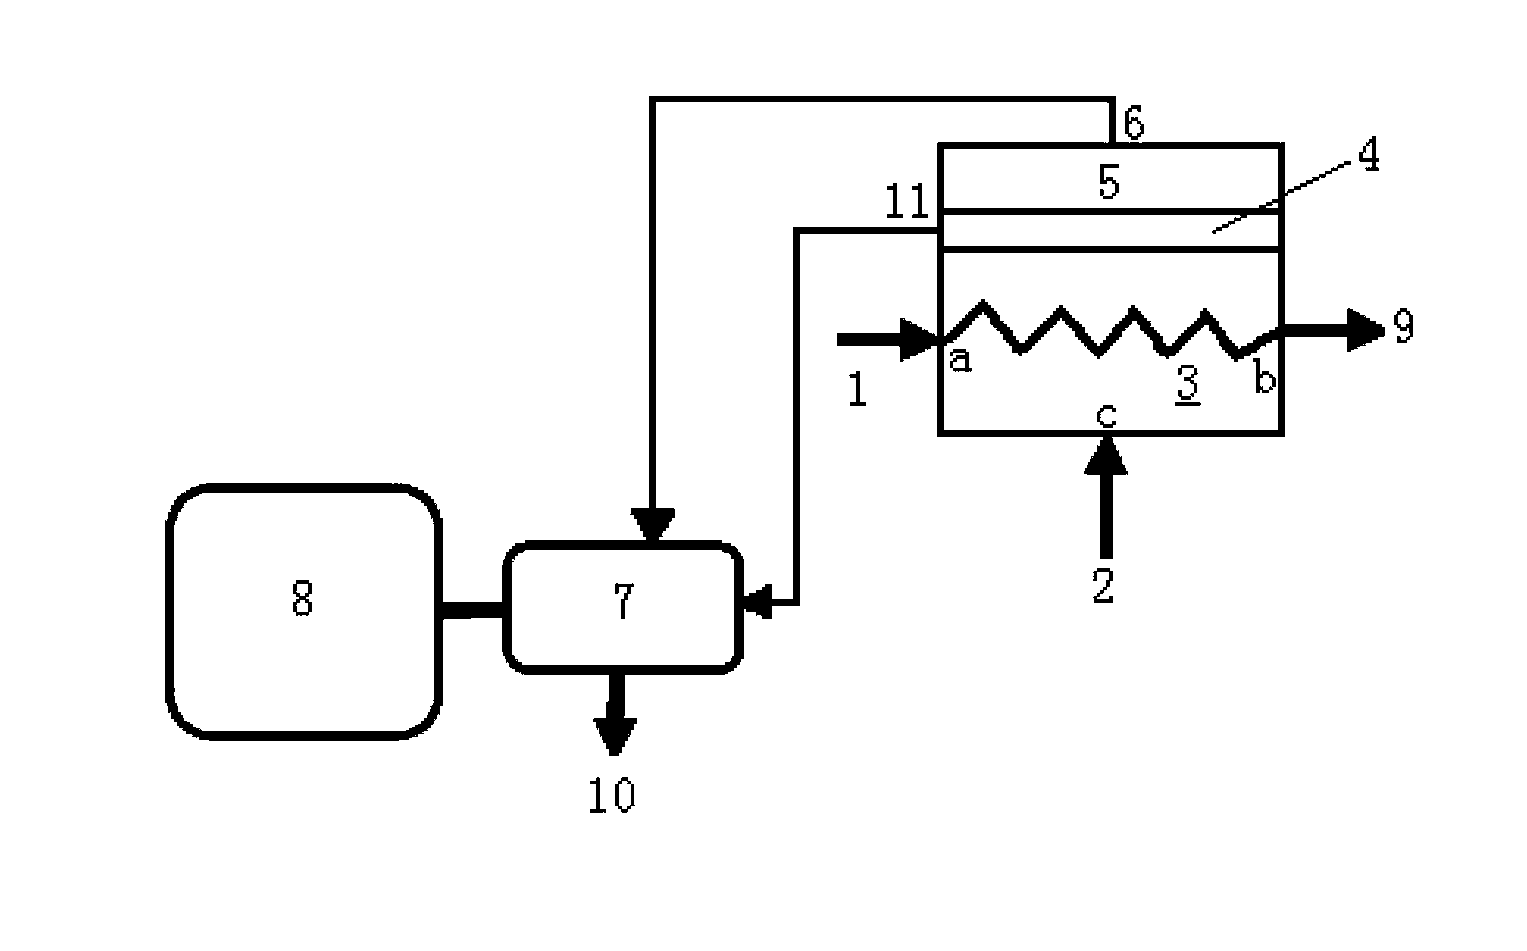 Lubrication and cooling system of low-temperature thermal power generation expander